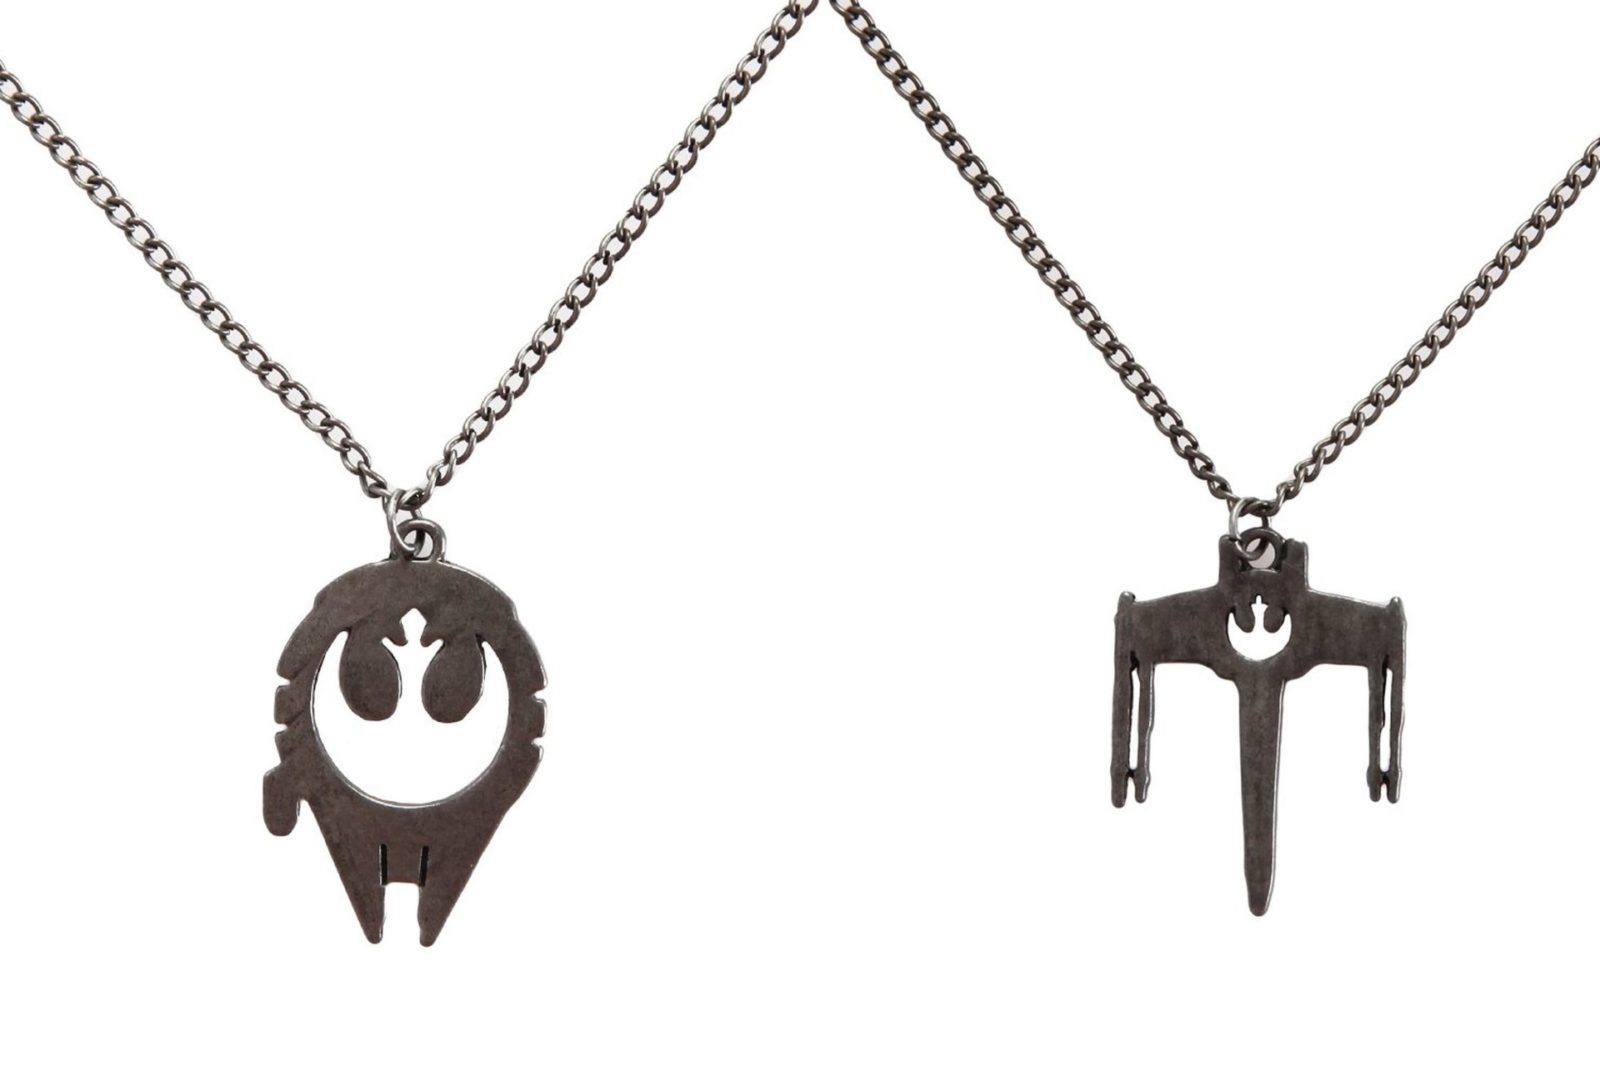 Amazon - Rebel Alliance symbol cut-out necklaces from Newbury Comics